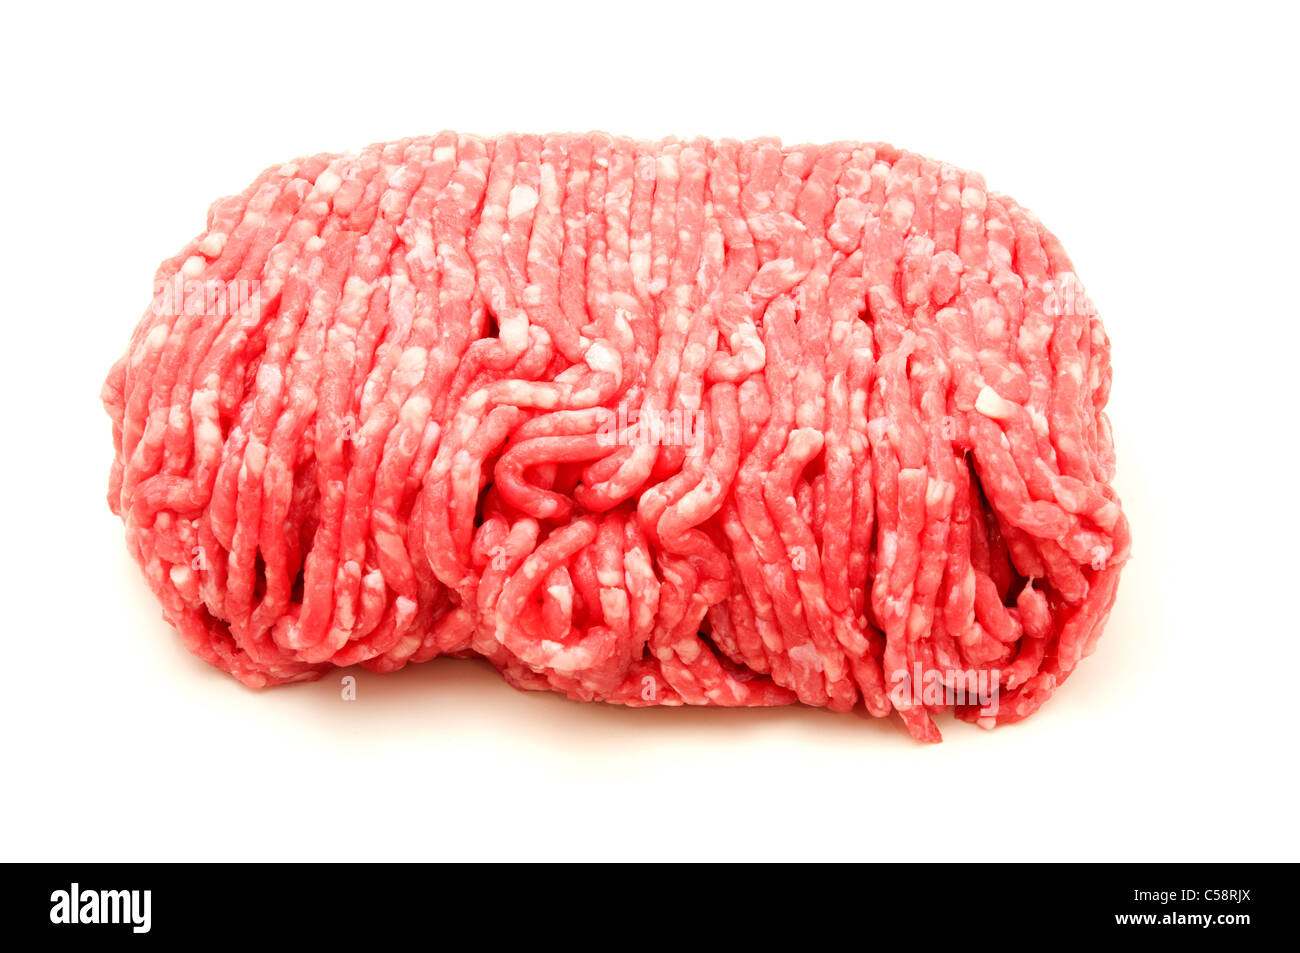 Raw beef mince on a white background Stock Photo